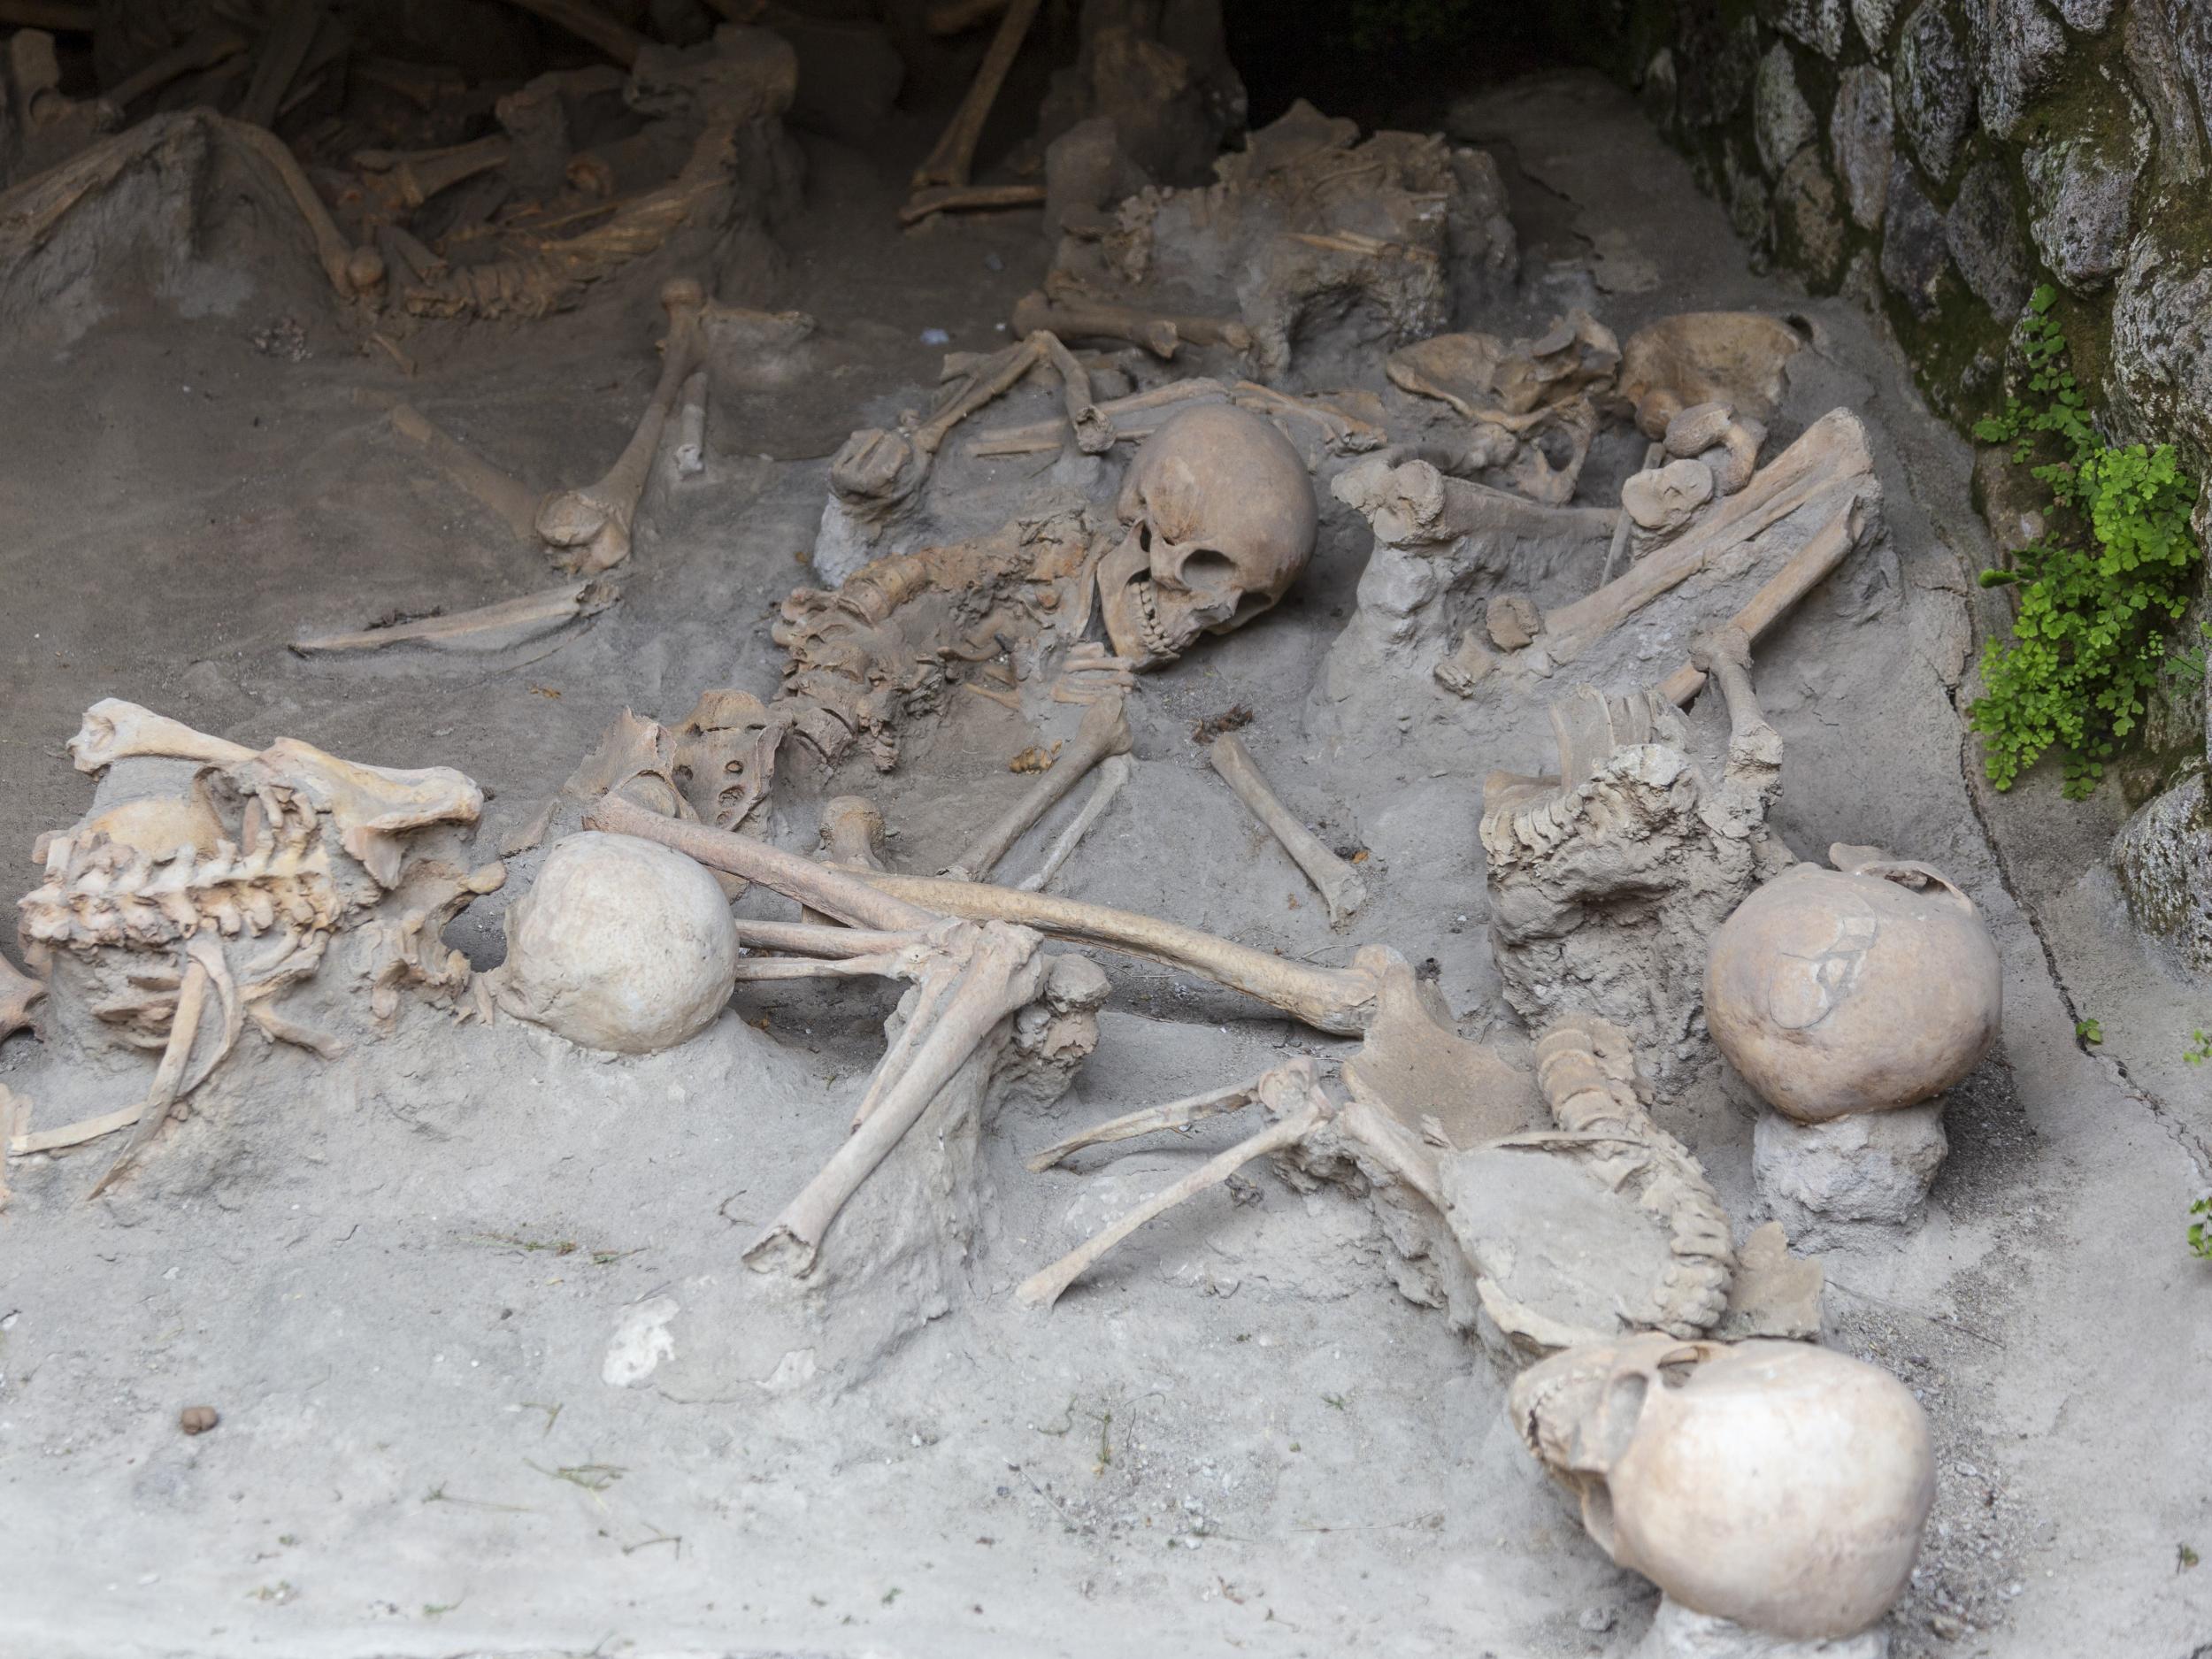 Archaeologists have found hundreds of human remains in Herculaneum buried in volcanic ash